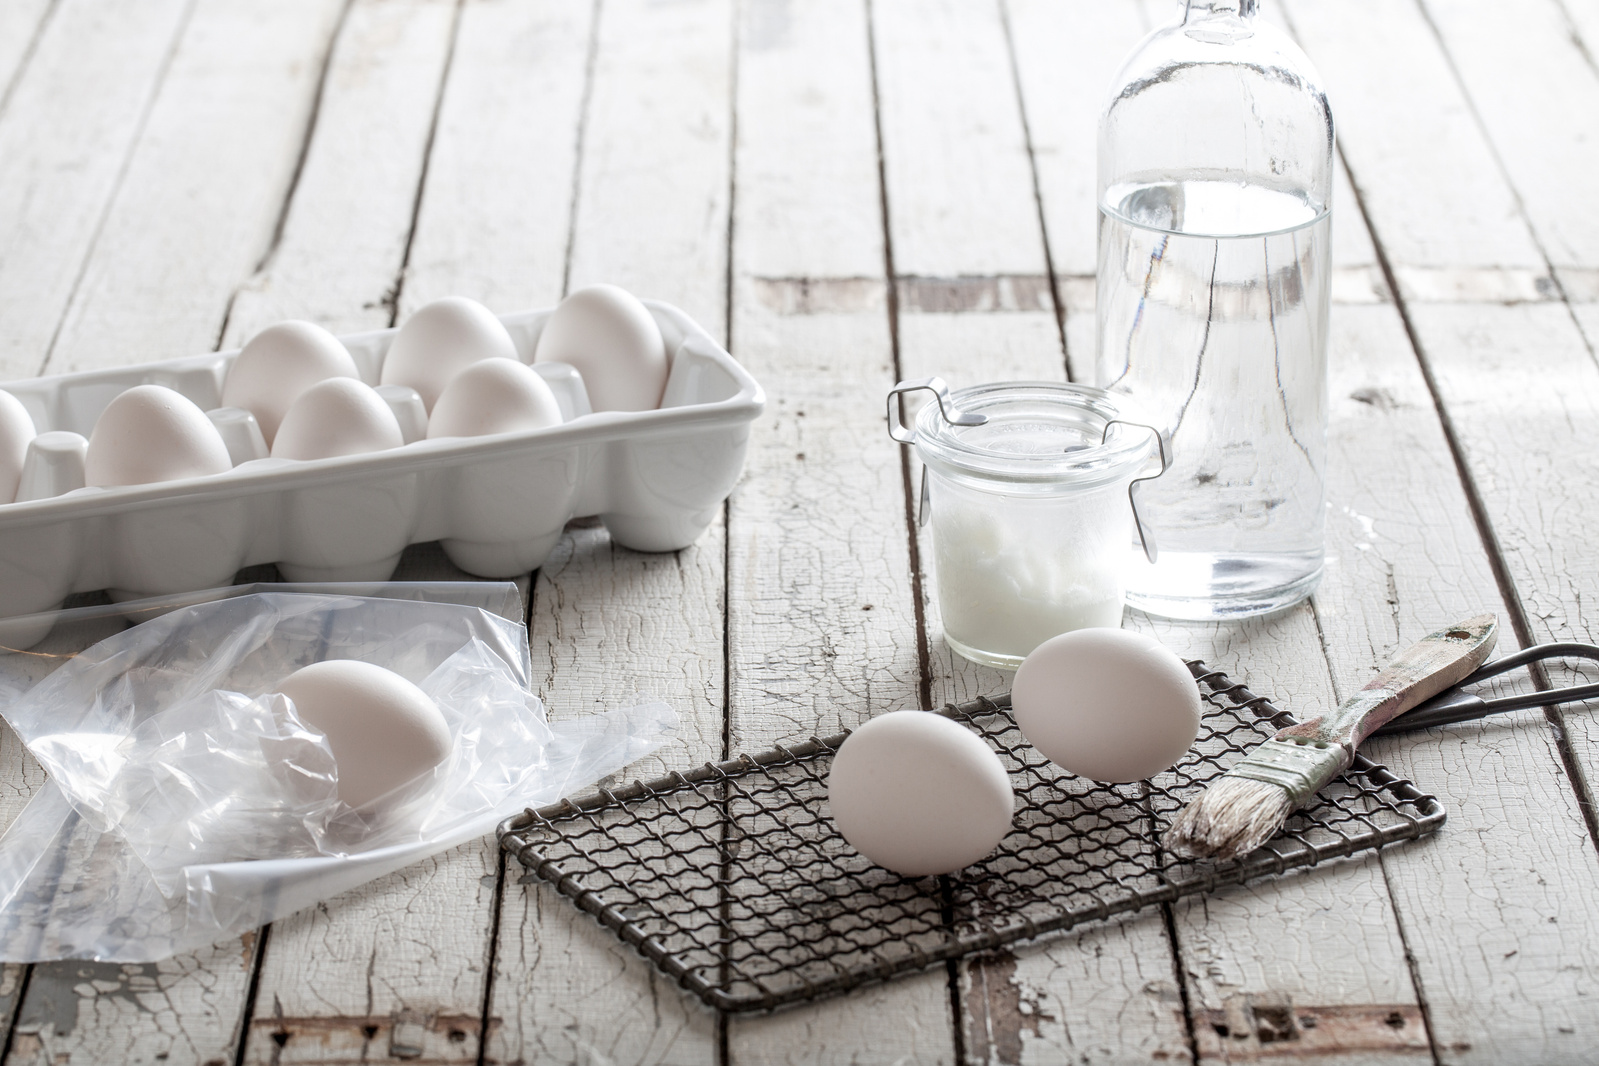 white eggs in a carton and on a grid with dying supplies on a white wood surface. setup image for diy cabbage dyed eggs photography